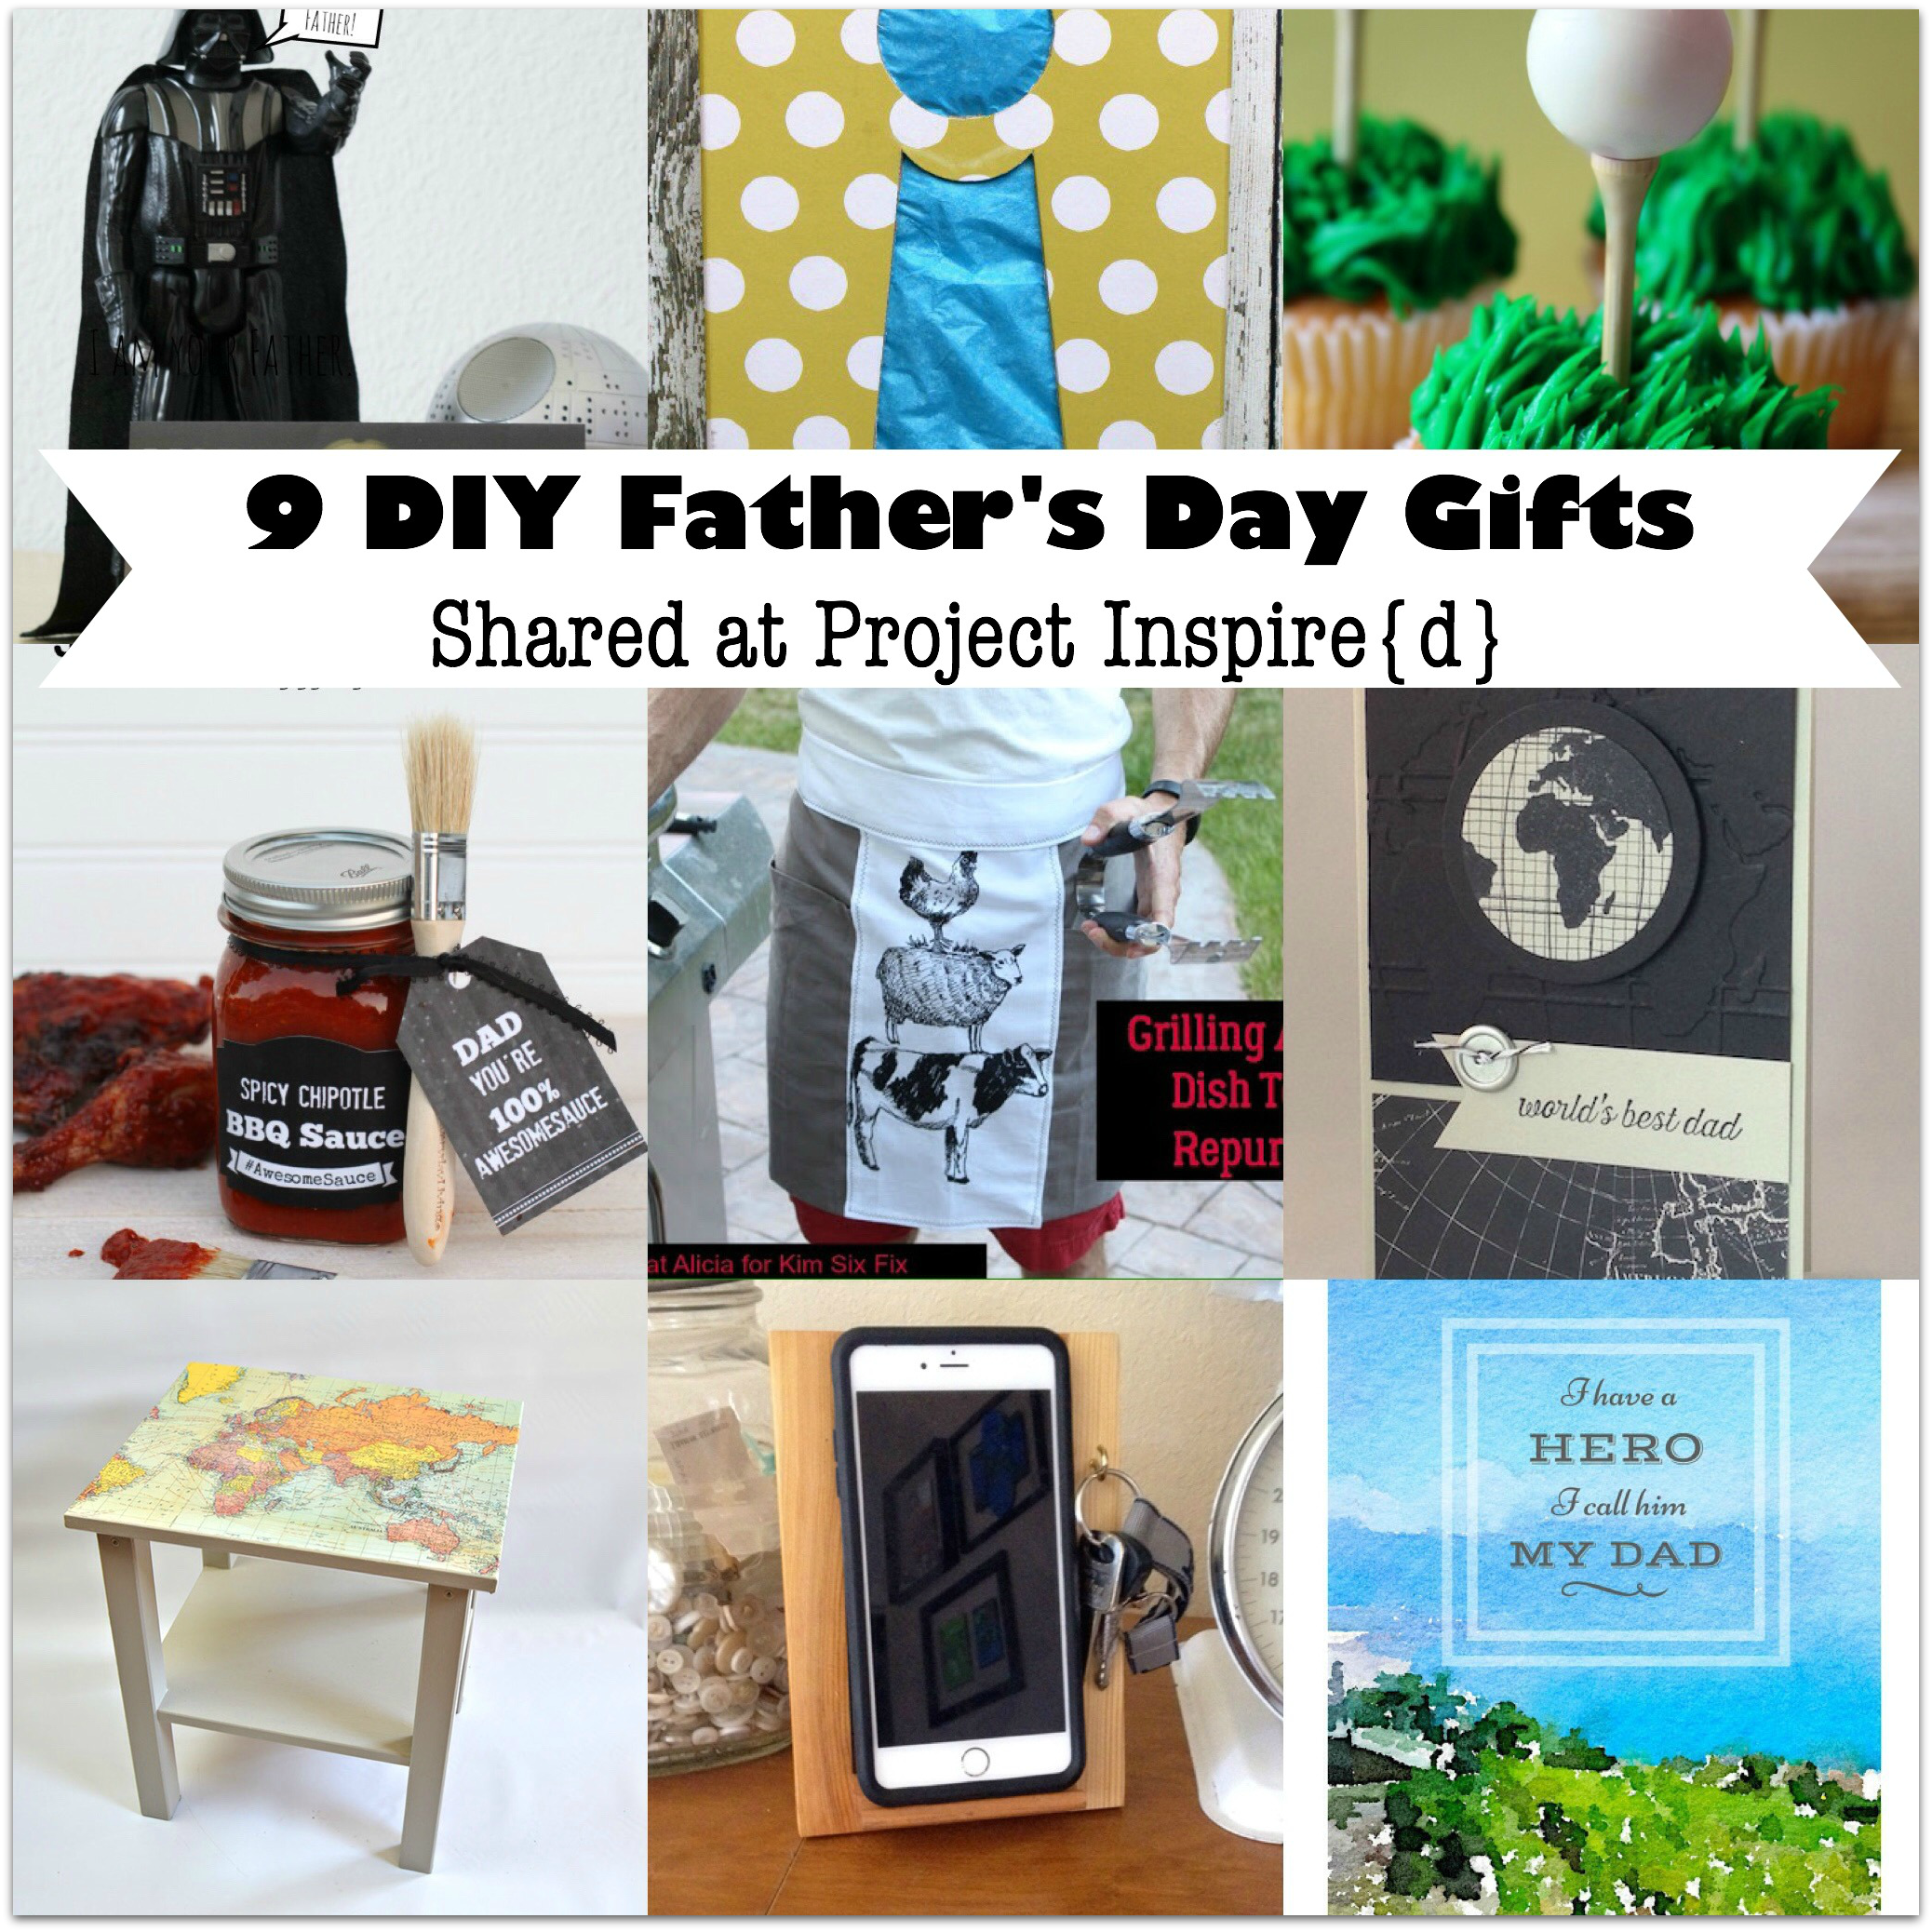 9 DIY Father's Day Gift Ideas | Yesterday On Tuesday